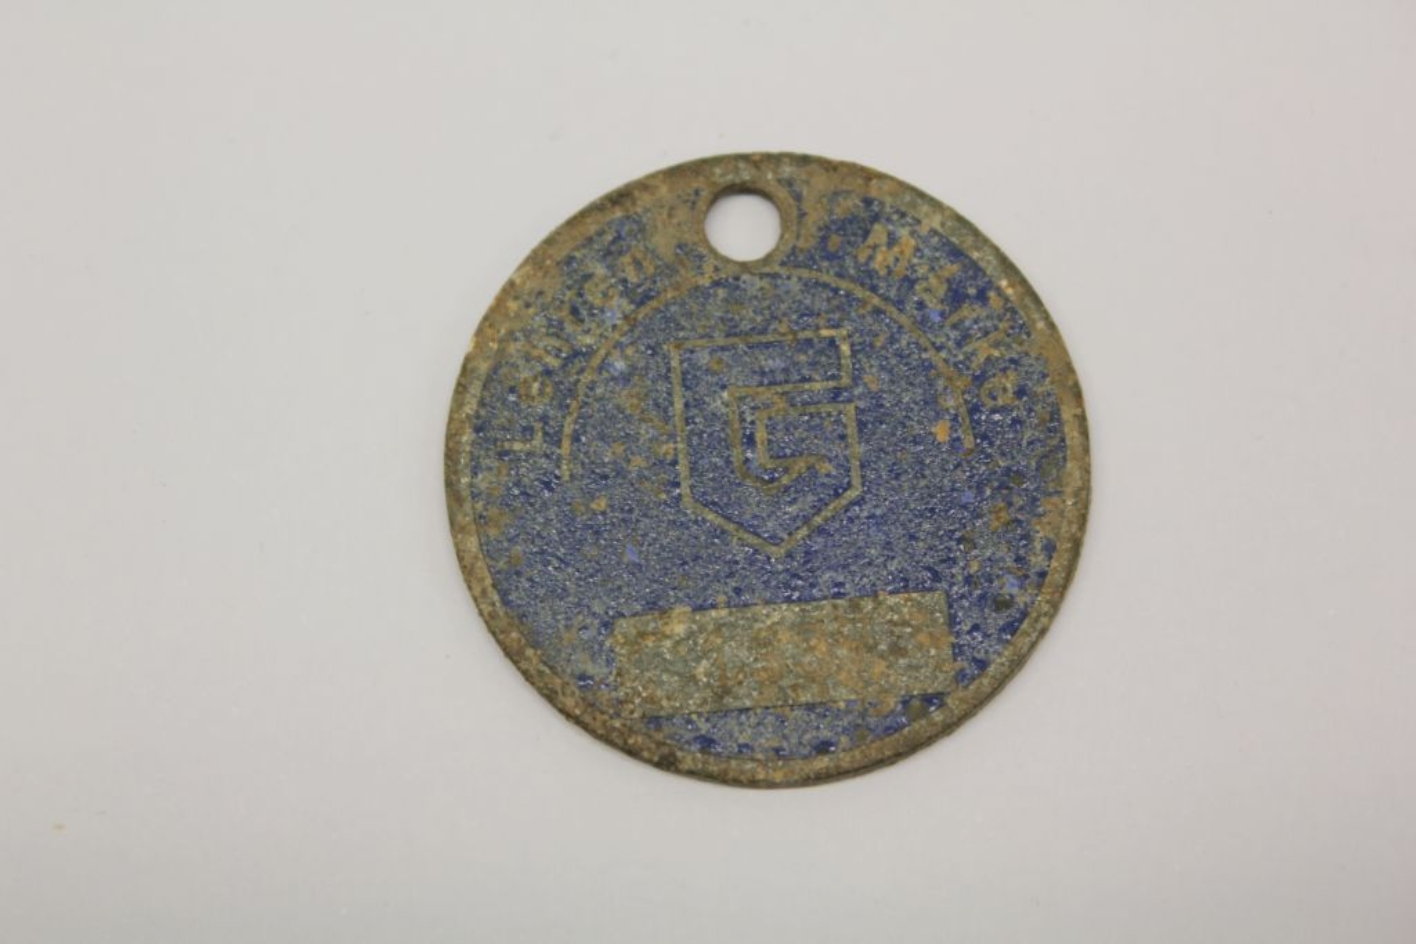 Circular mark. The front is dark blue enamel with underlined single-line lettering "Lehren Marke" arranged in a semicircle. In the center a stylized "G" as a logo. Much rust. 